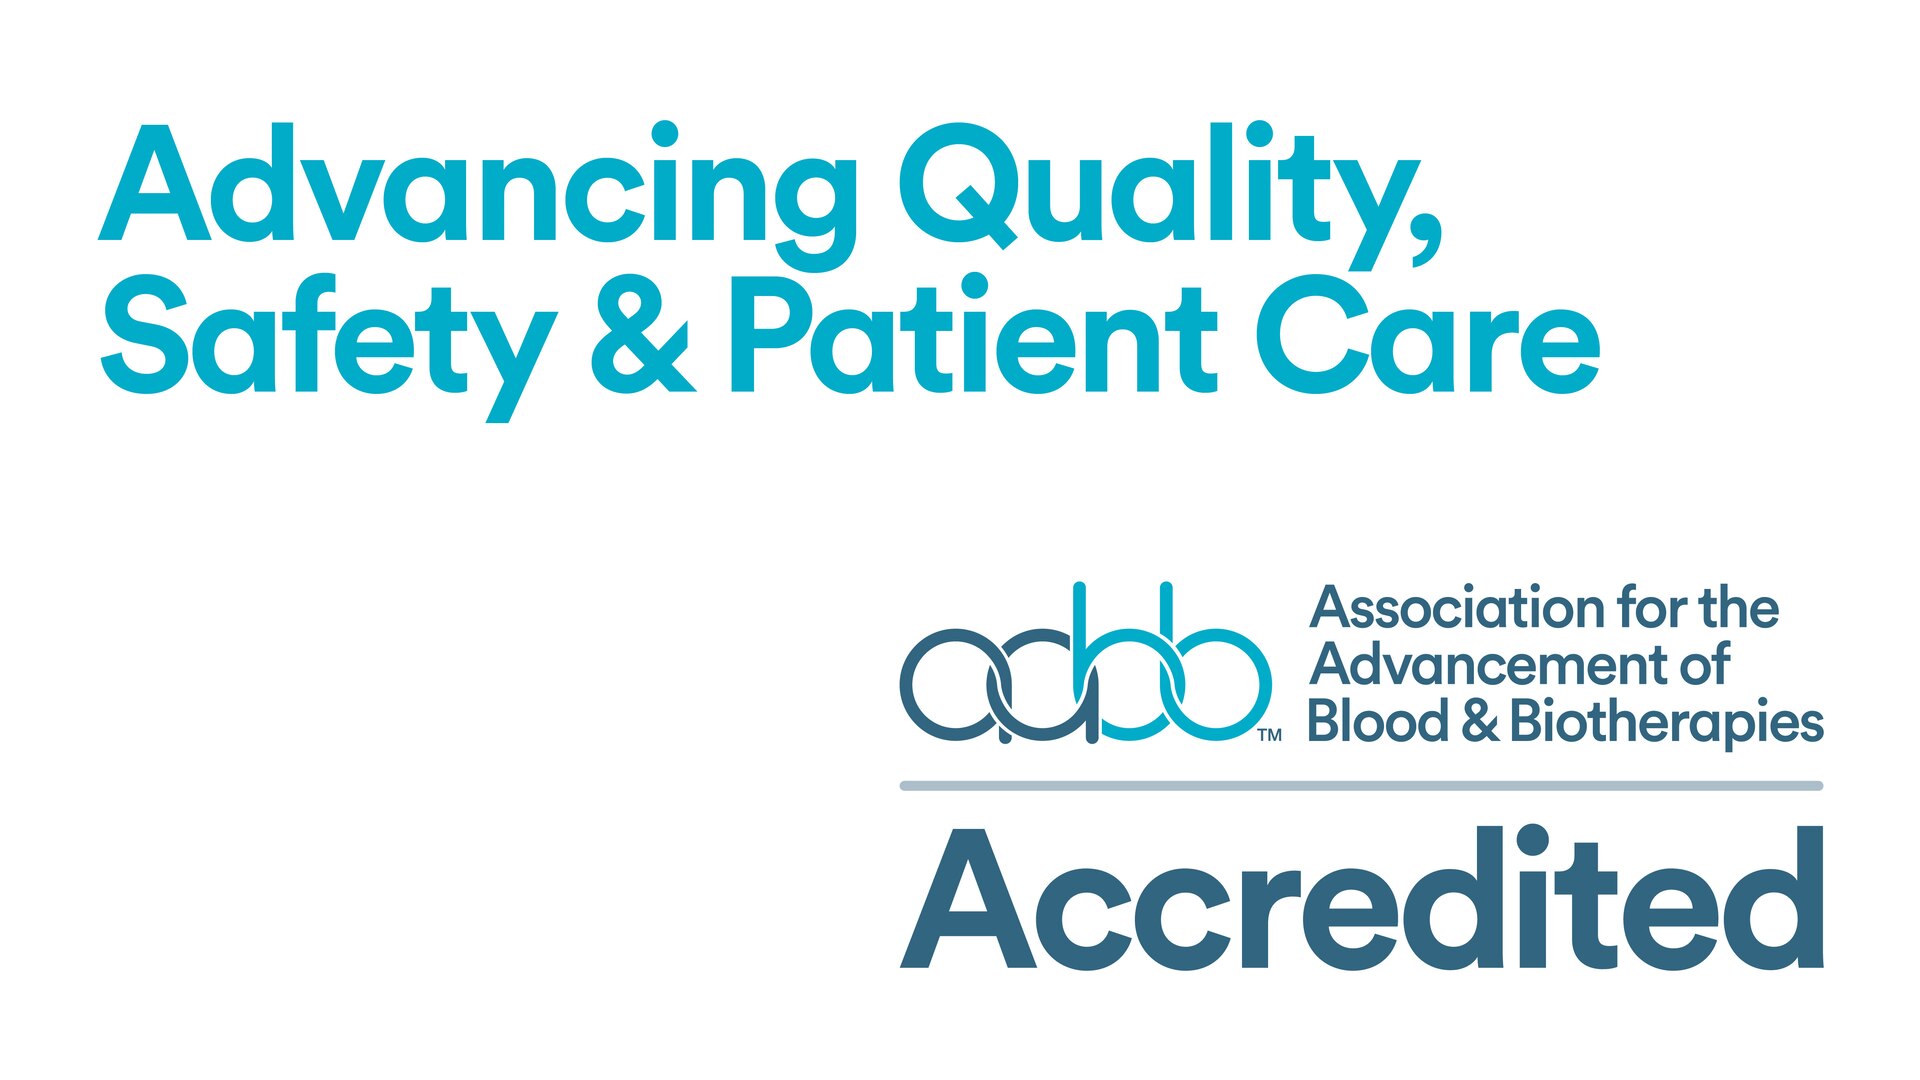 Advancing Quality, Safety & Patient Care; AABB Accredited Logo